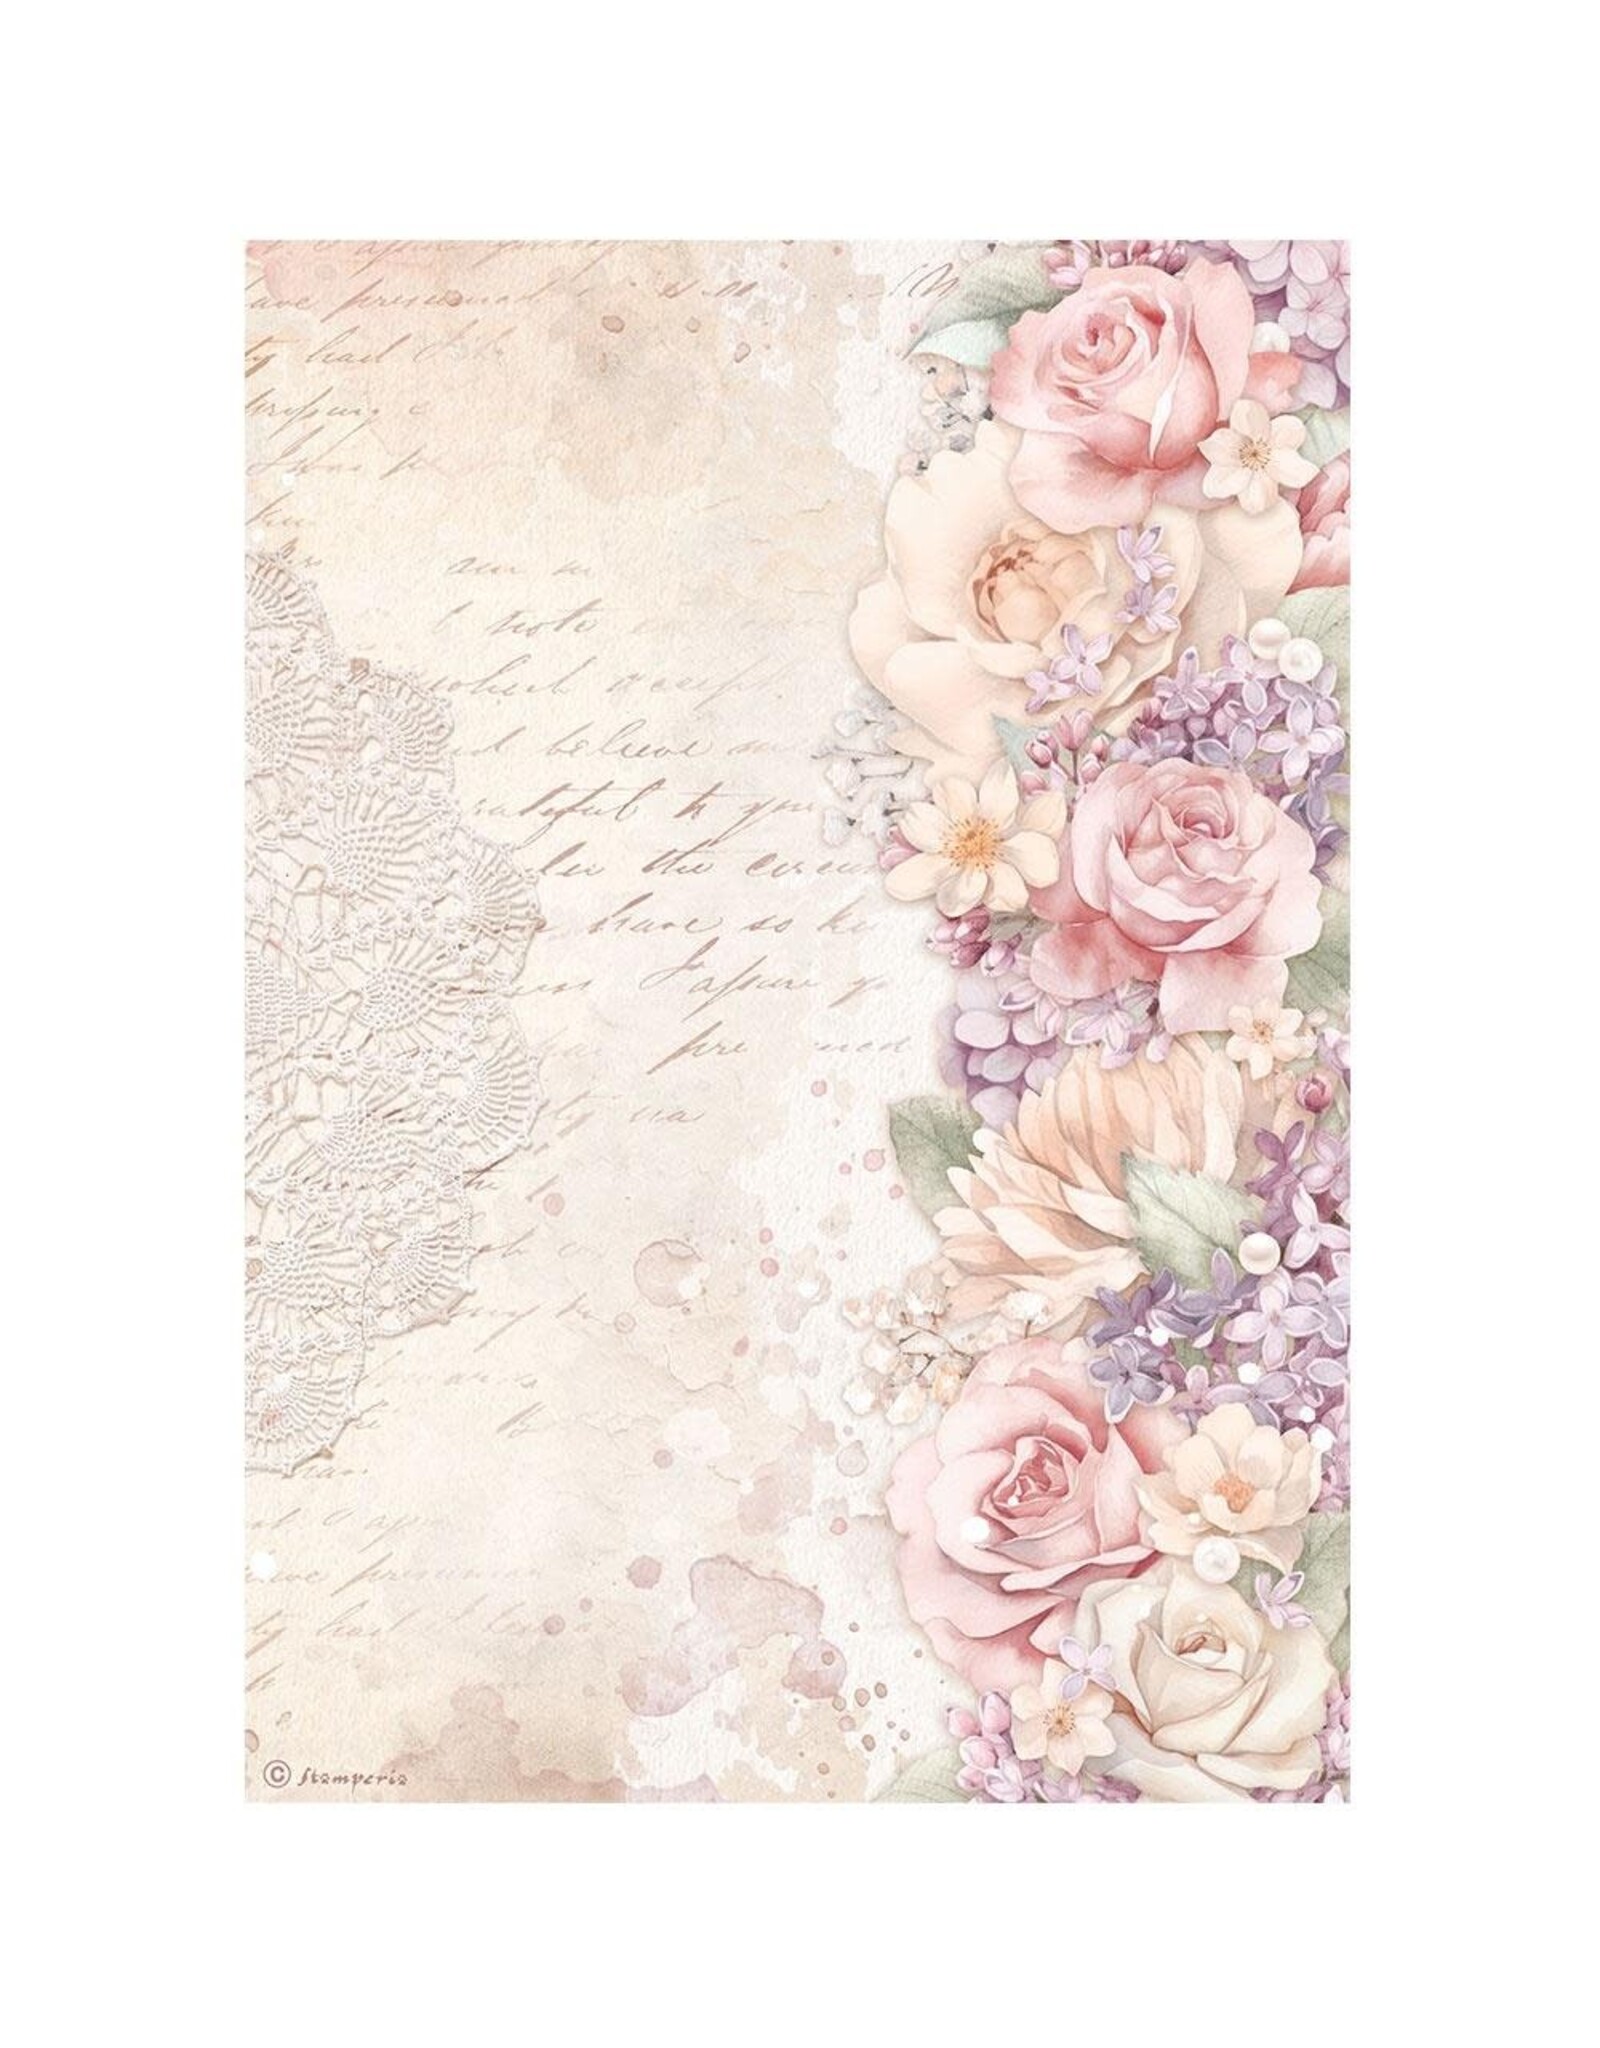 STAMPERIA STAMPERIA ROMANCE FOREVER ASSORTED A4 RICE PAPER DECOUPAGE 21X29.7CM 6/PK